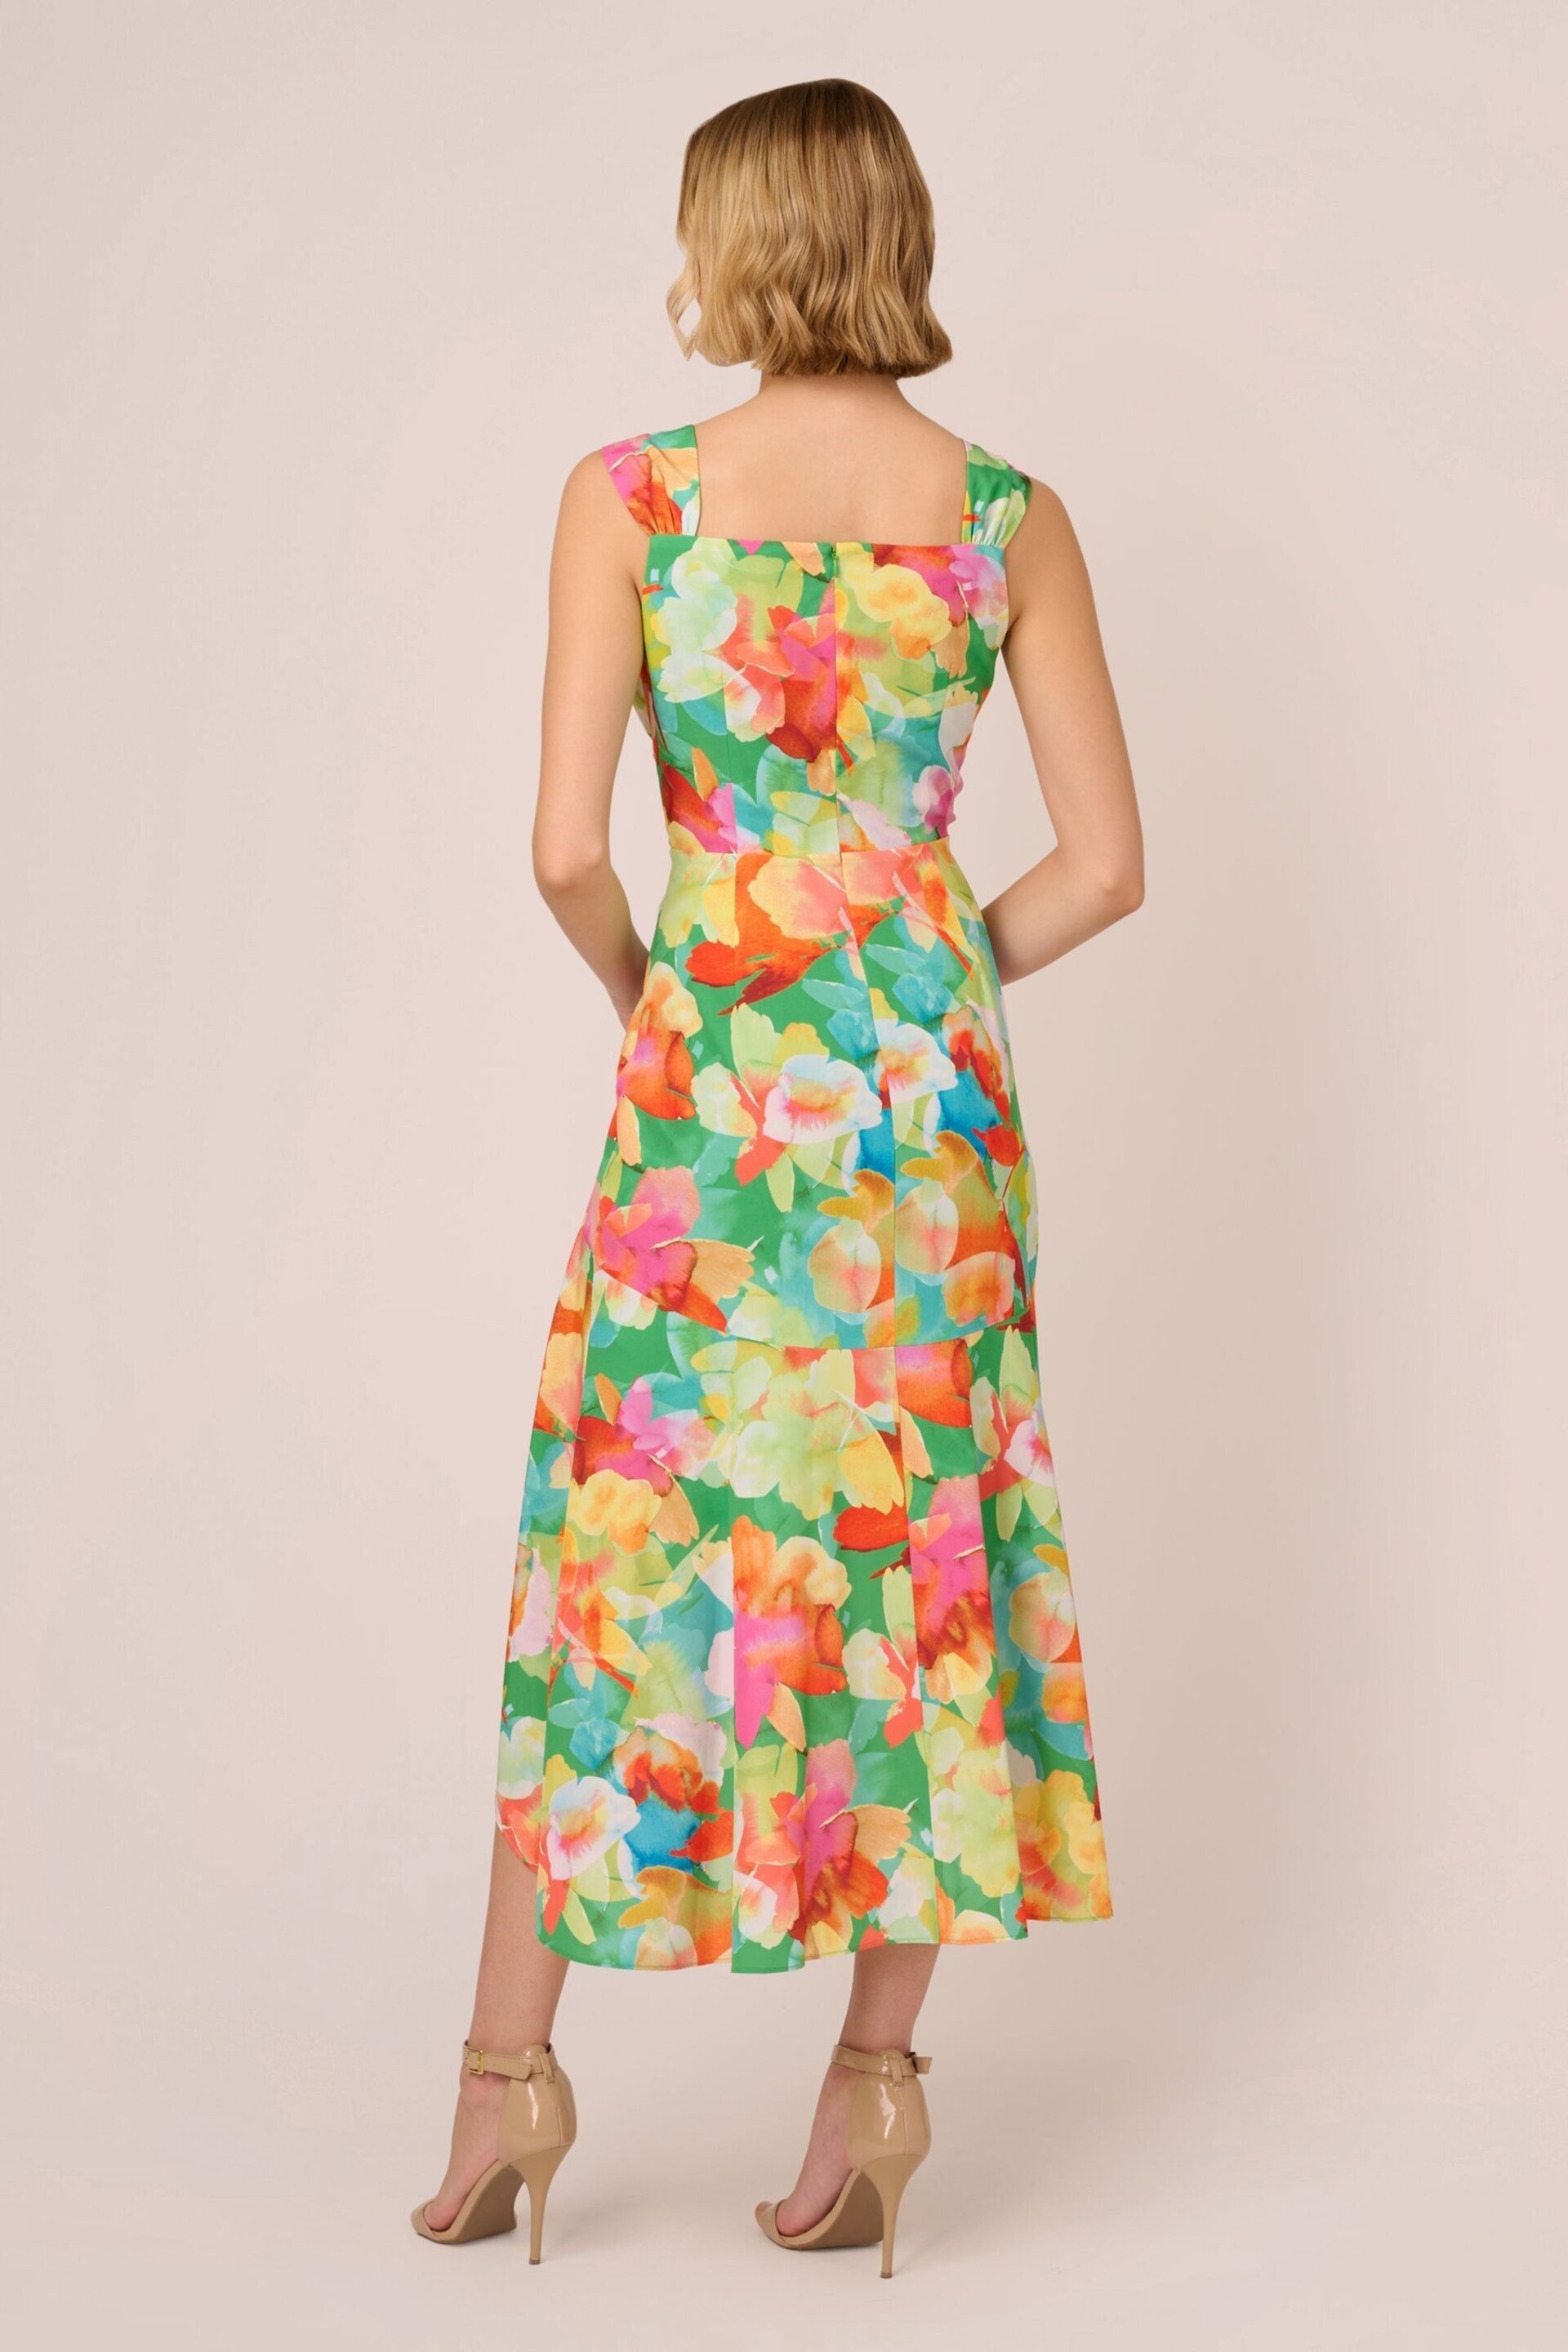 Adrianna Papell Multi Printed Hi-Low Dress - Image 2 of 7